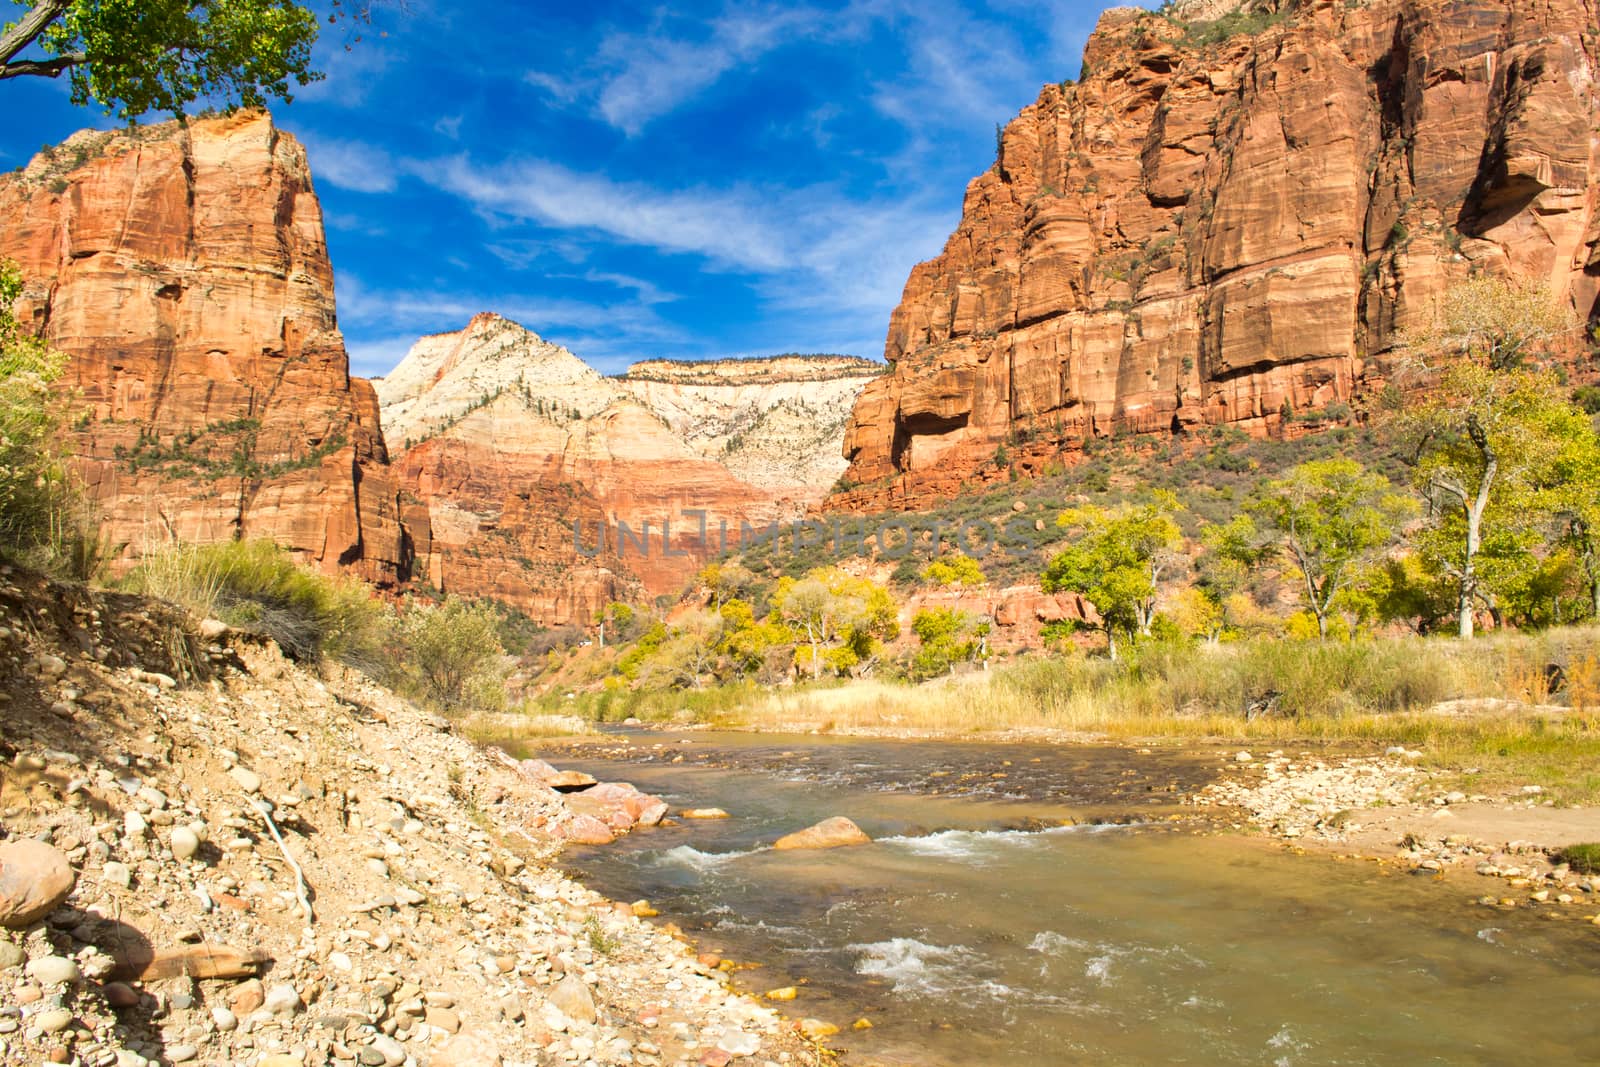 View on a river Virgin flowing through Zion national park in Utah, United states. by kb79